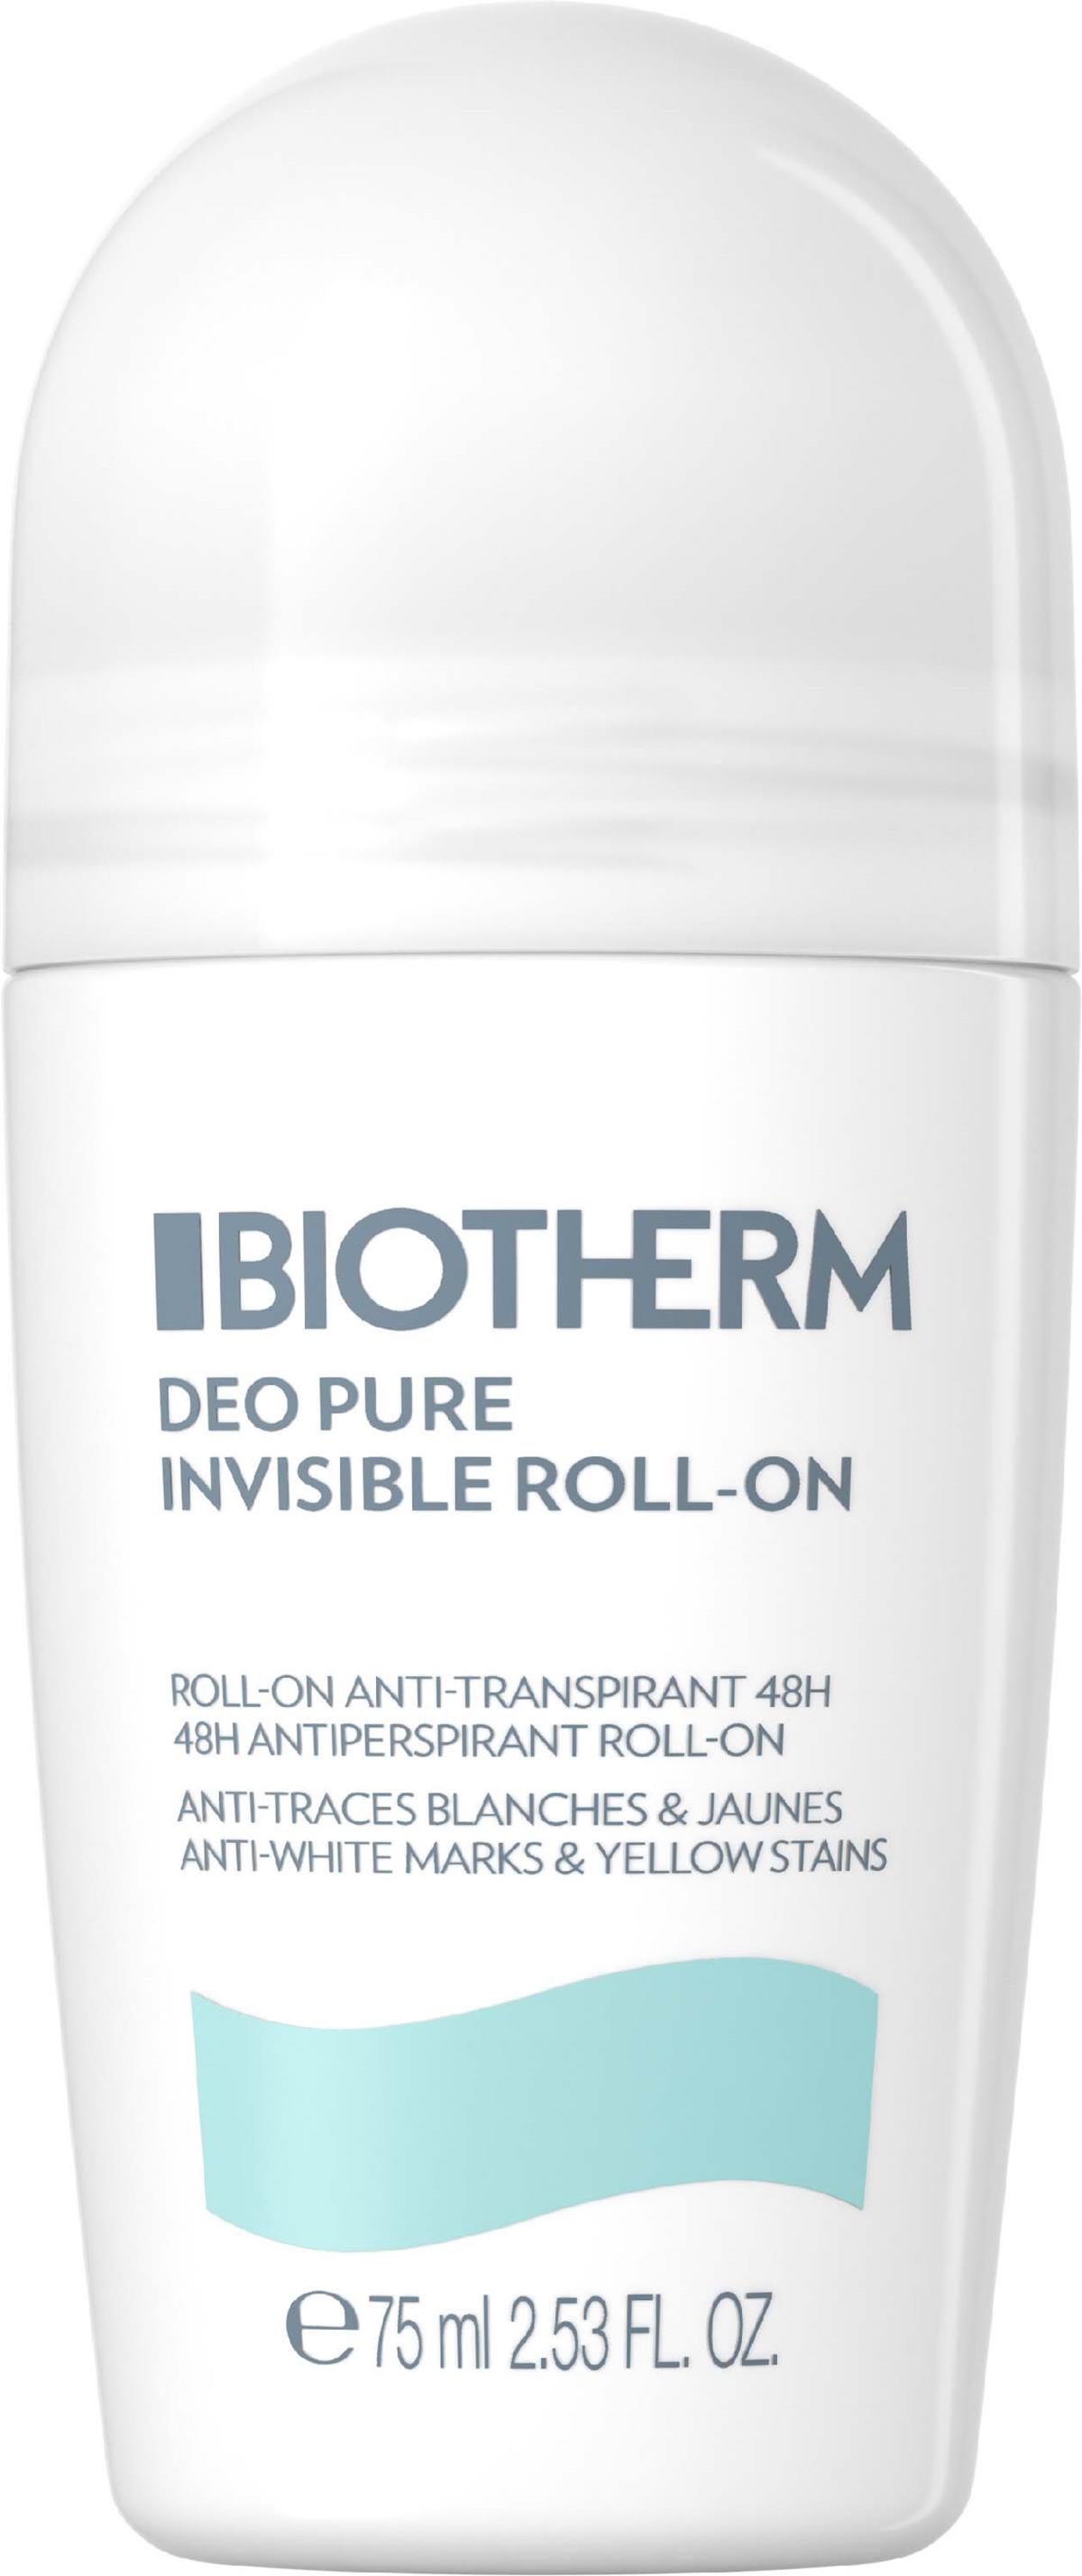 Air mail triple Overwhelm Biotherm Deo Pure Invisible Roll- On 75 ml | lyko.com